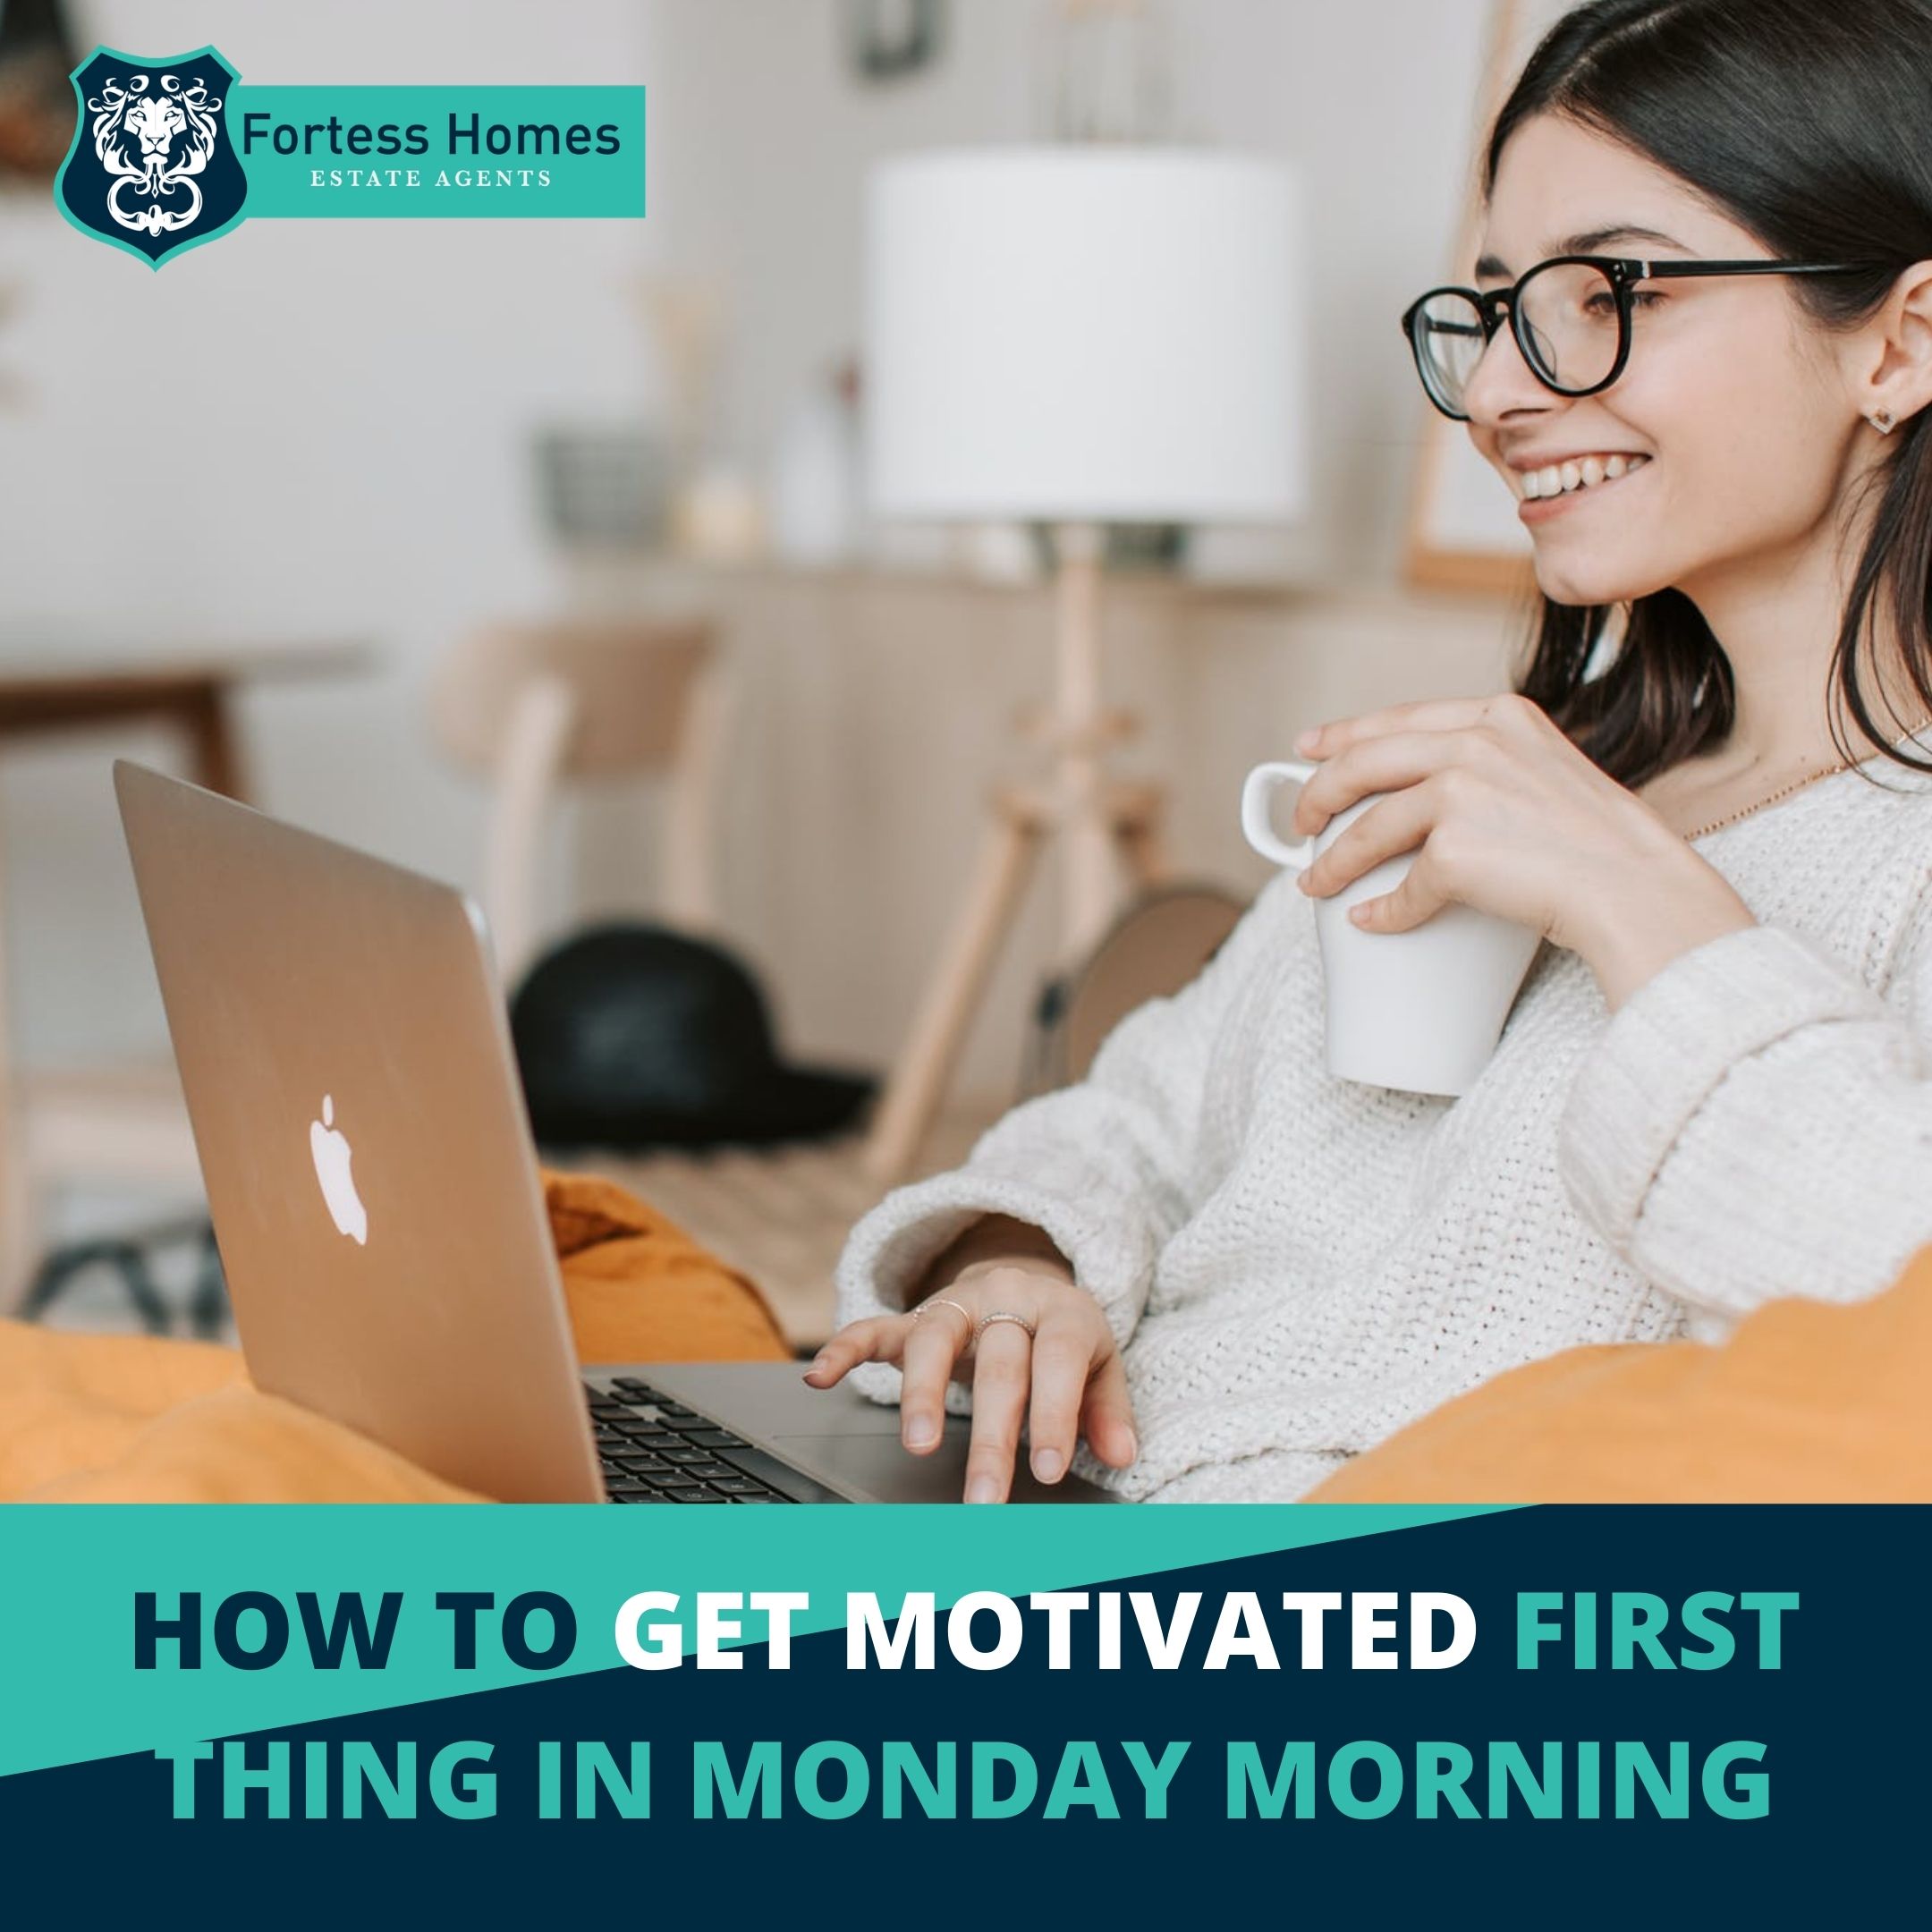 HOW TO GET MOTIVATED FIRST THING IN MONDAY MORNING